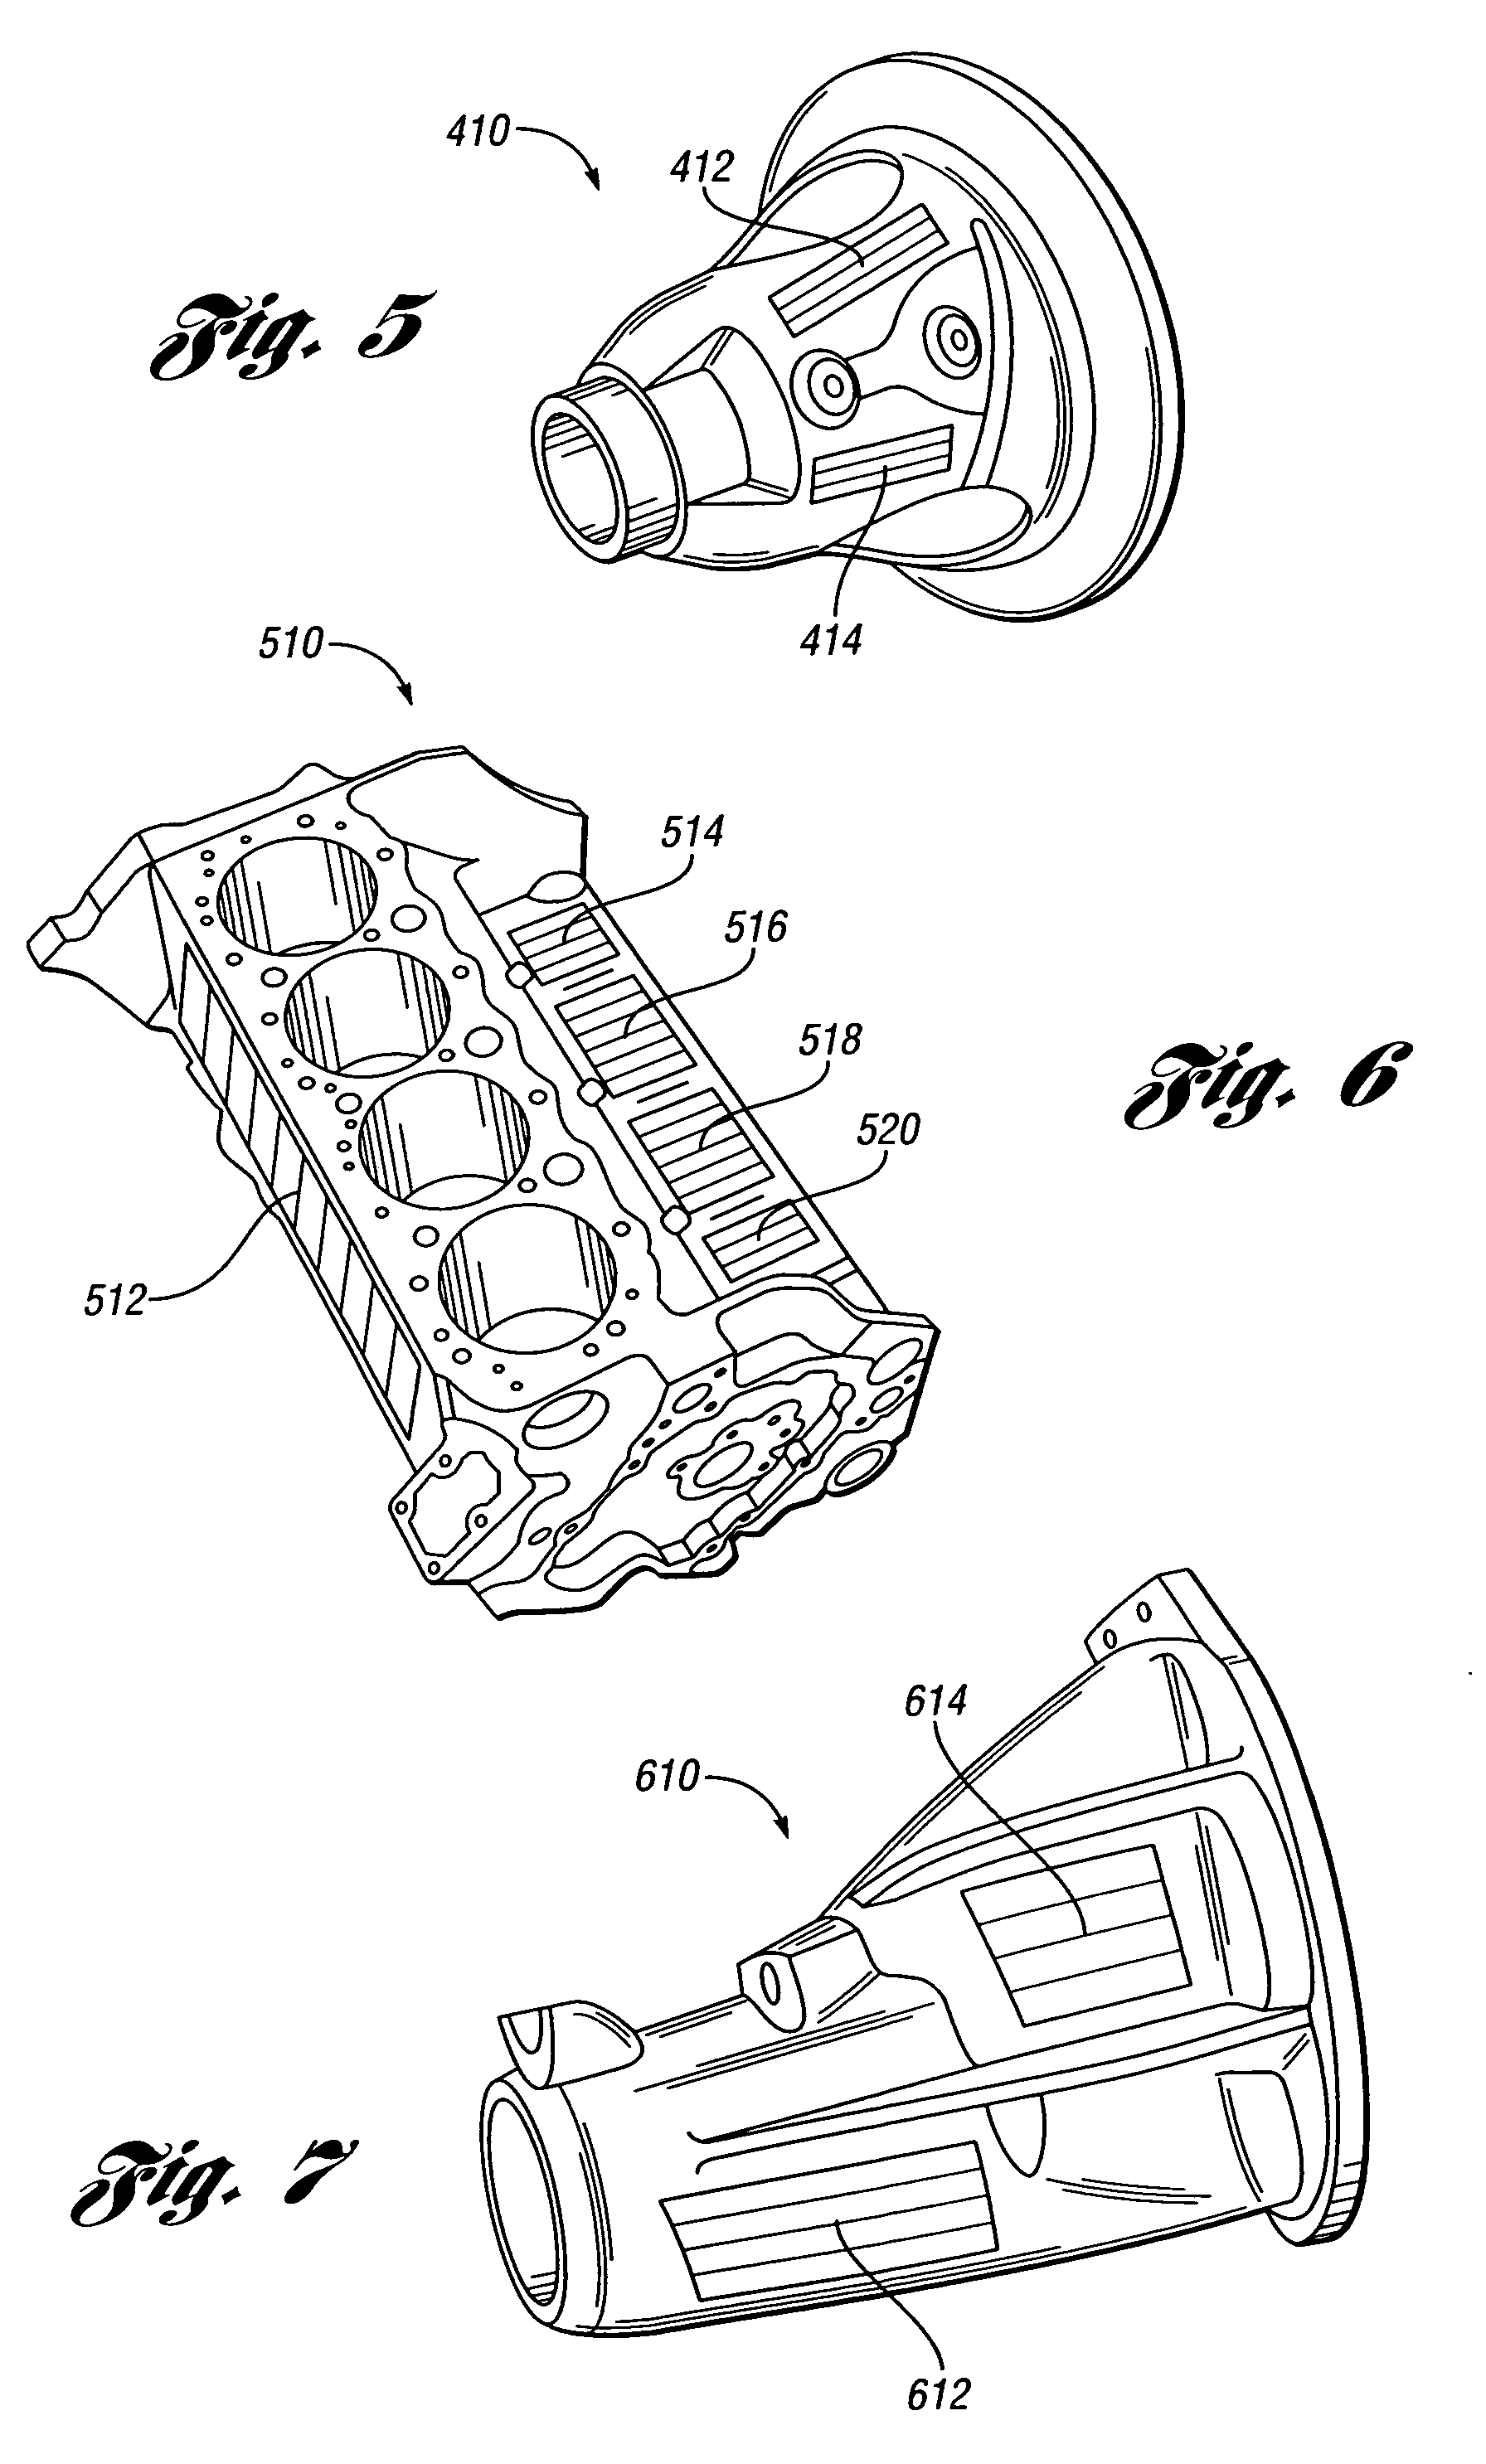 Method of casting components with inserts for noise reduction